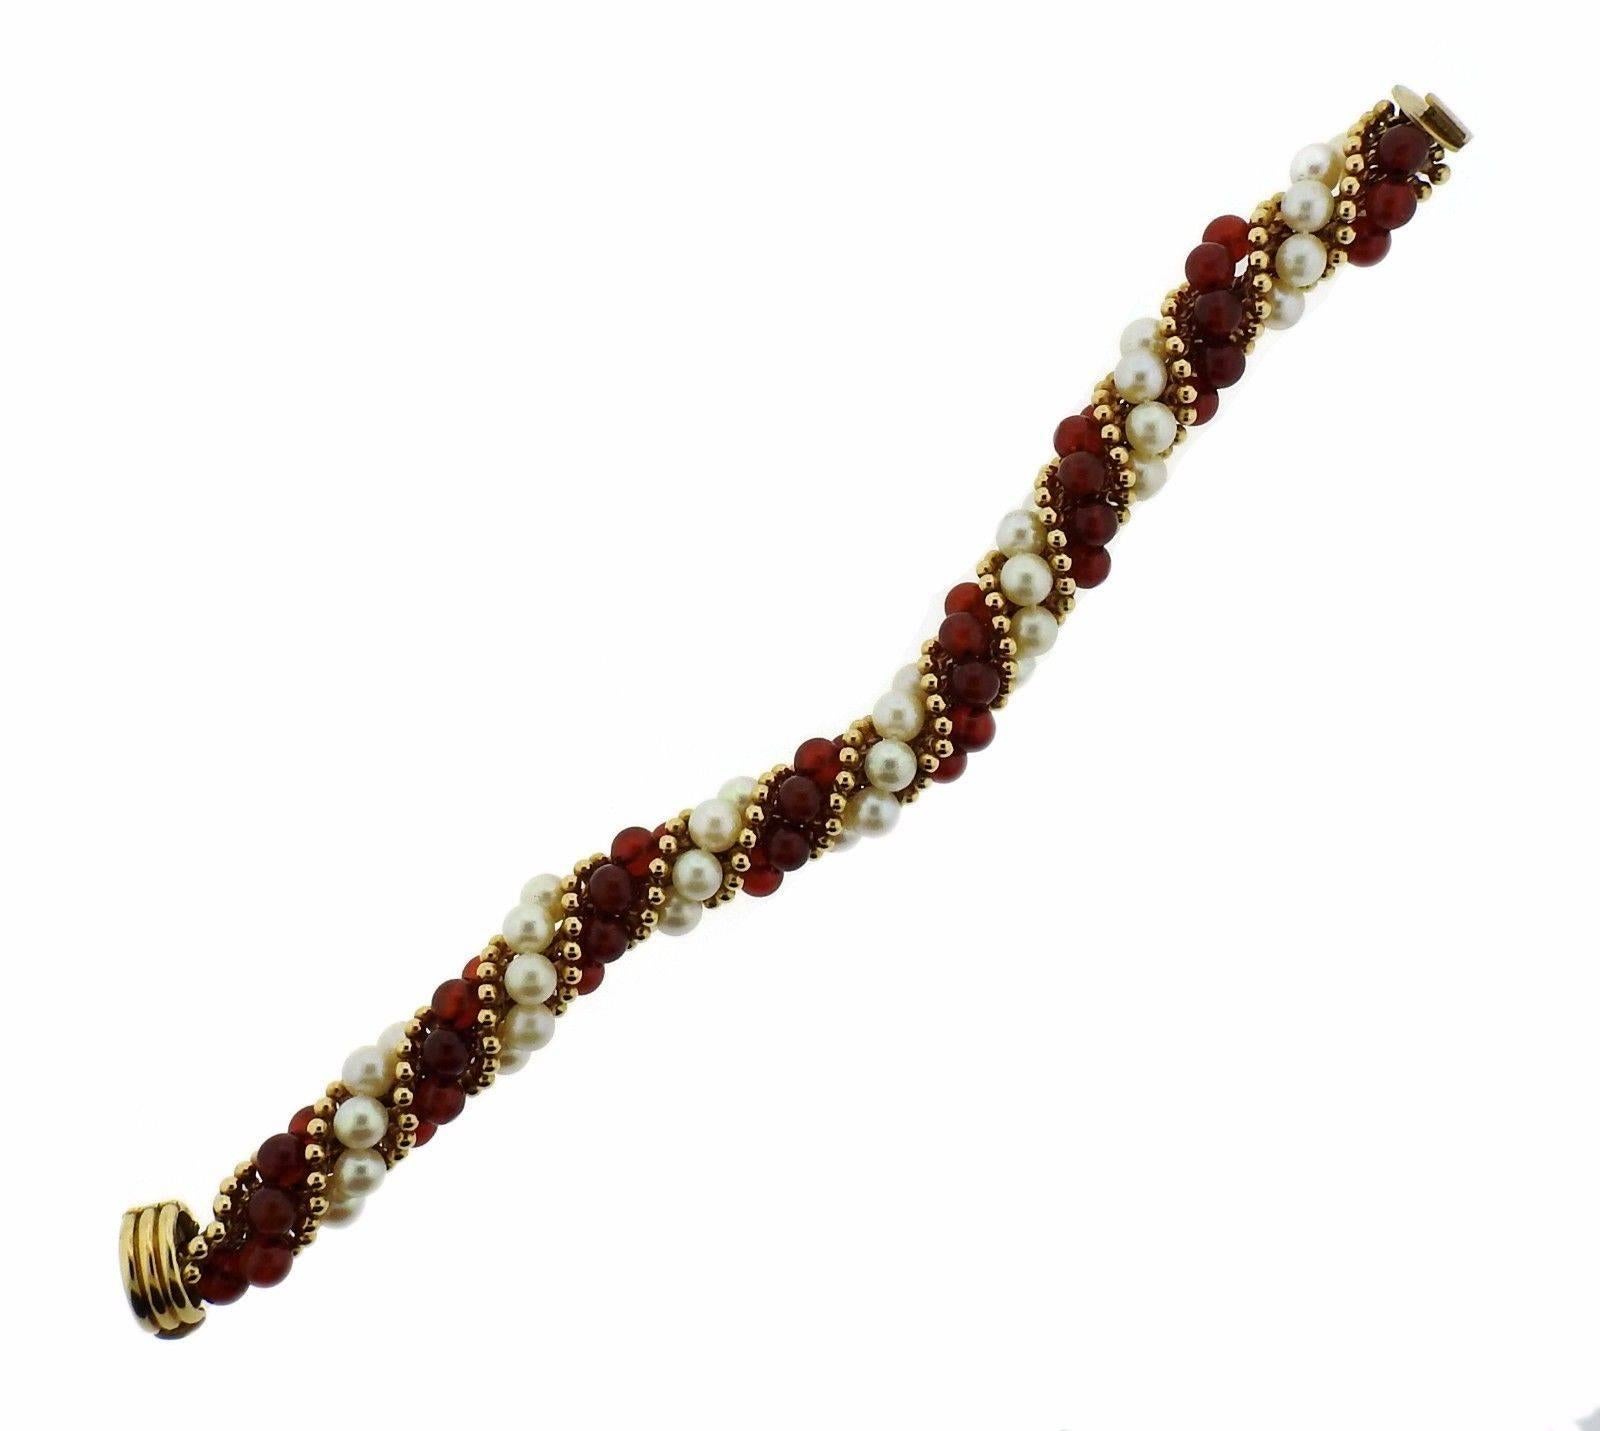 An 18k gold bracelet set with pearls (6.1mm - 6.5mm) and carnelian (6mm).  The bracelet is 8.5